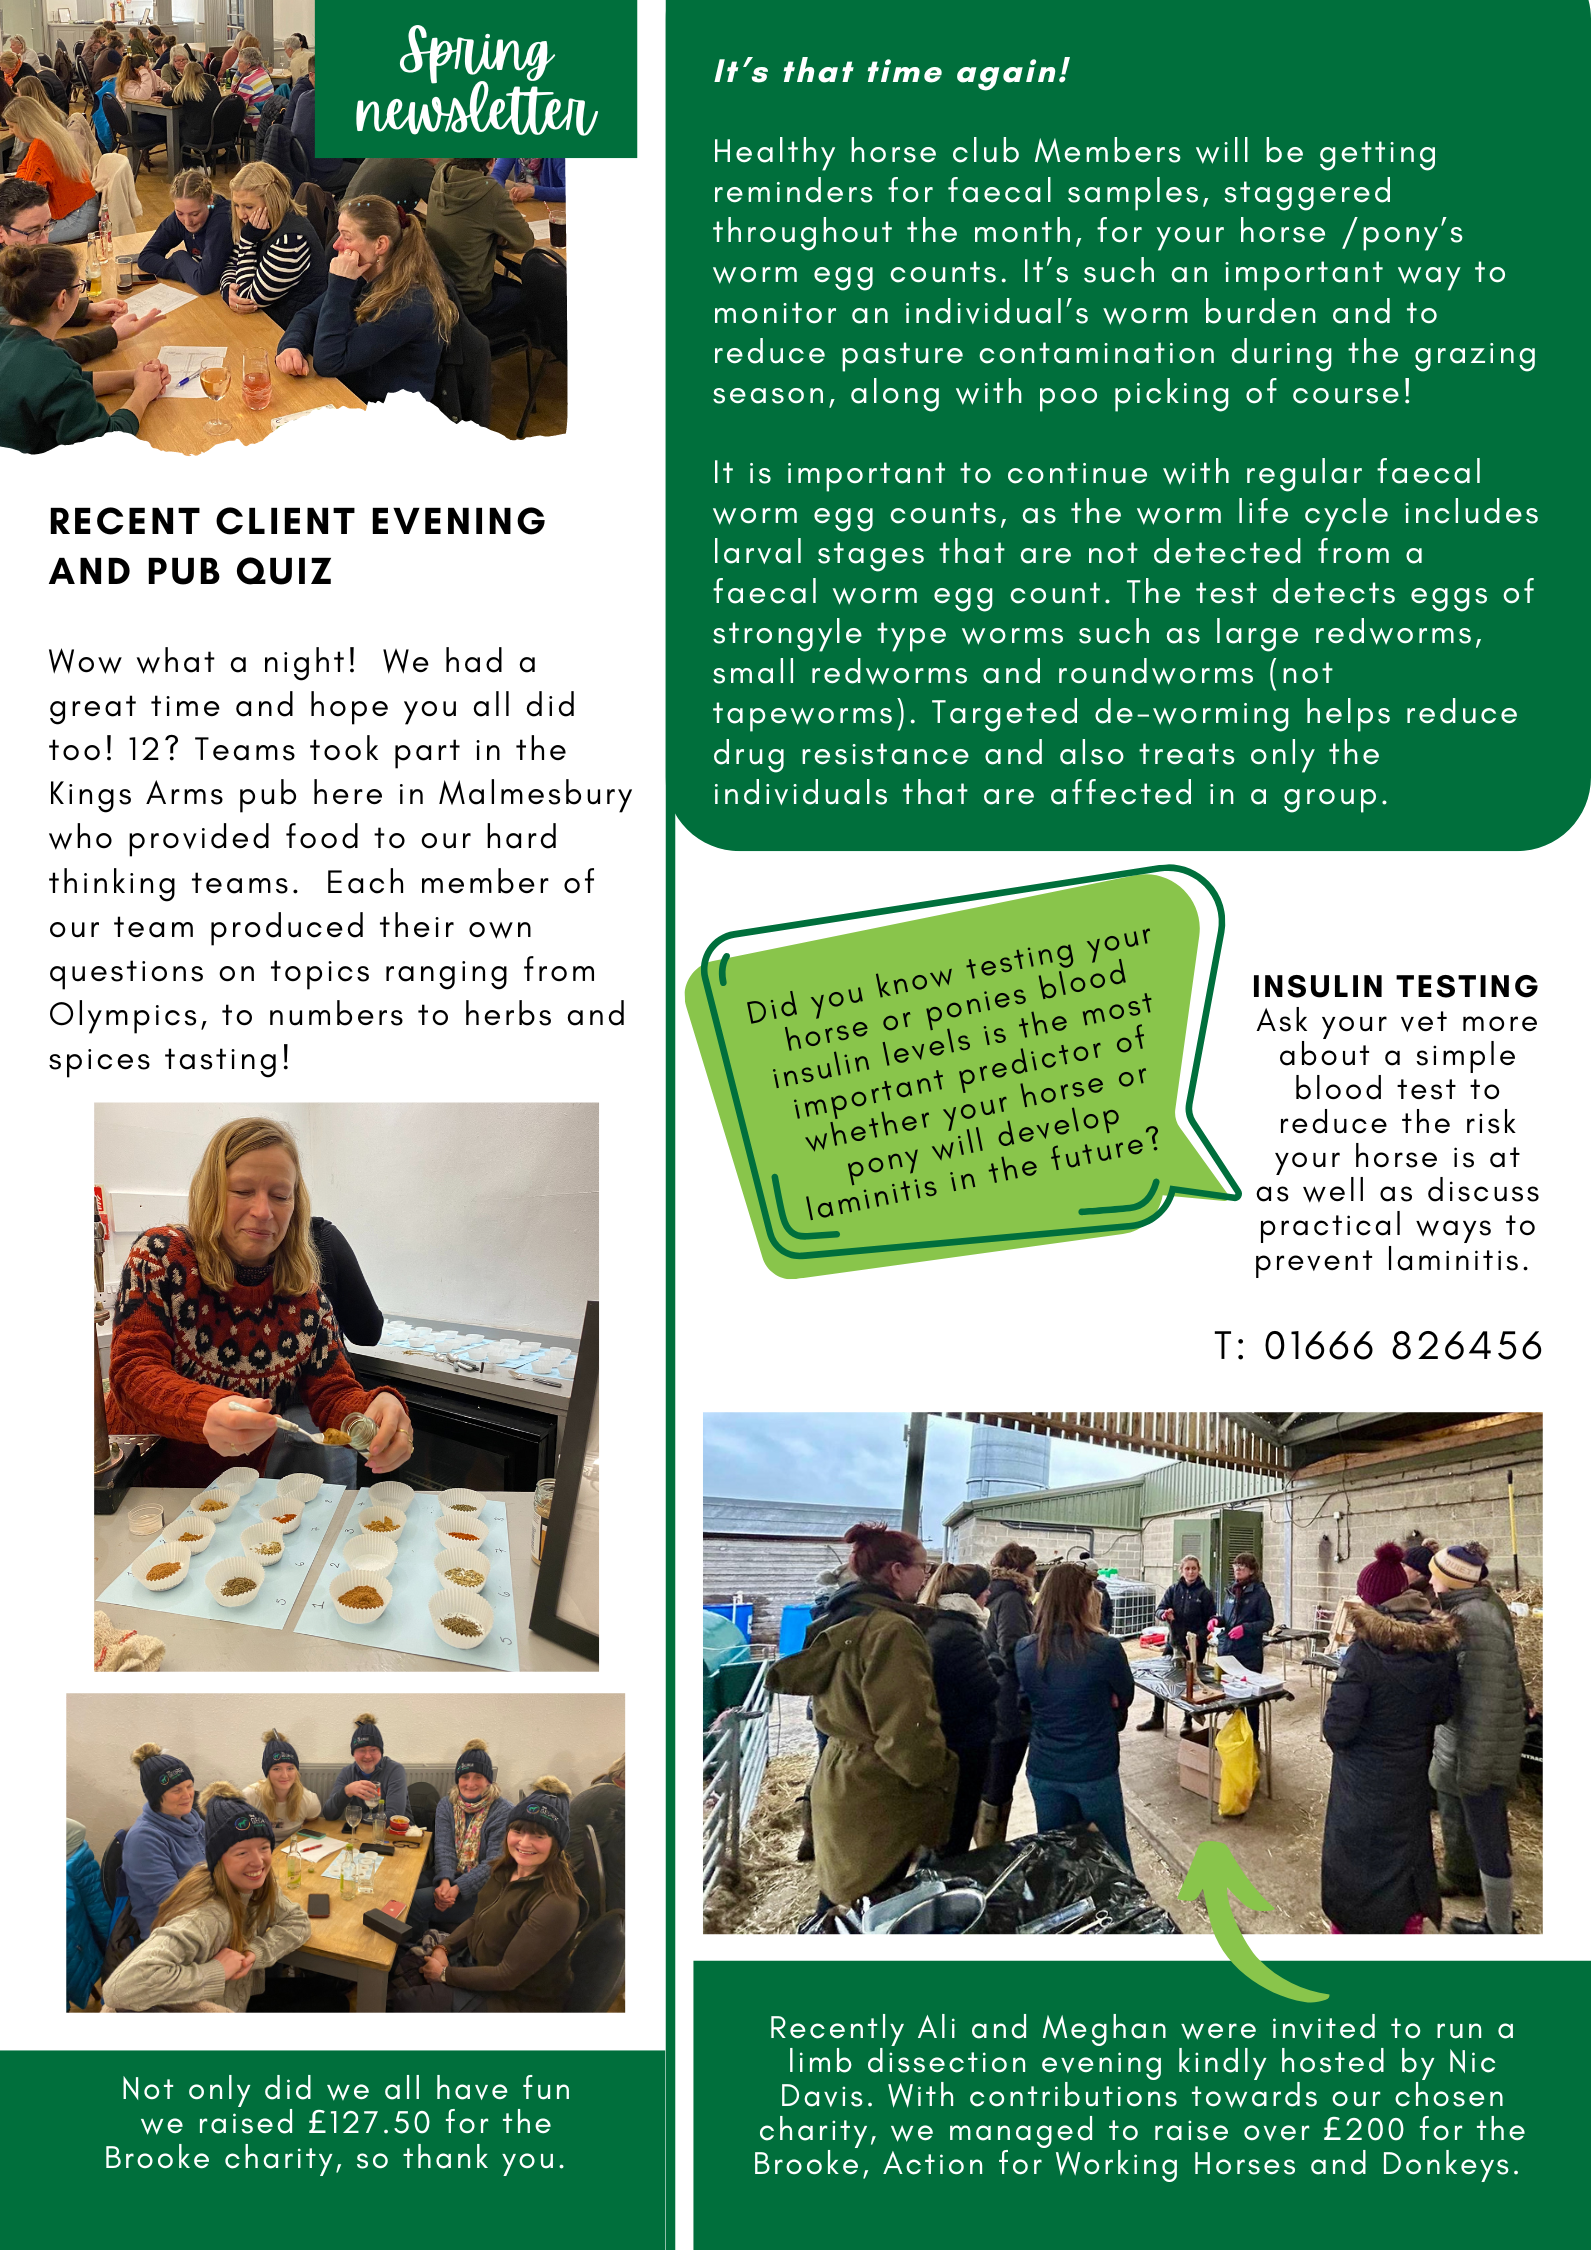 Spring newsletter from the Equine team